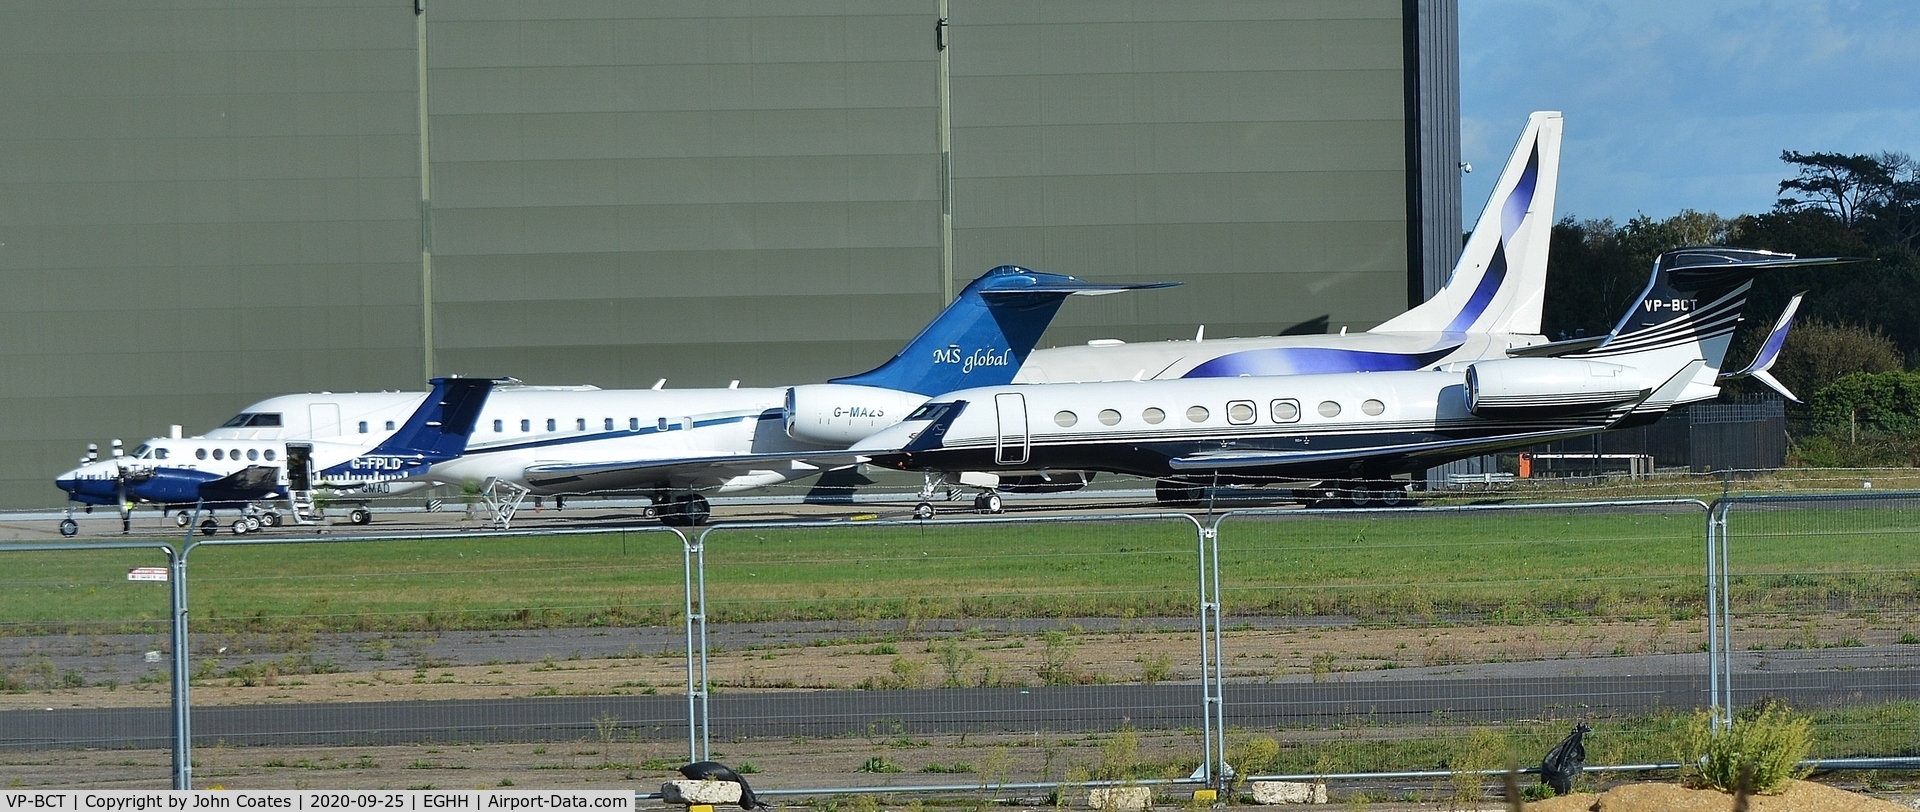 VP-BCT, 2016 Gulfstream Aerospace G650 (G-VI) C/N 6169, At Gama with GFPLD,G-MAZS and VQ-BLX